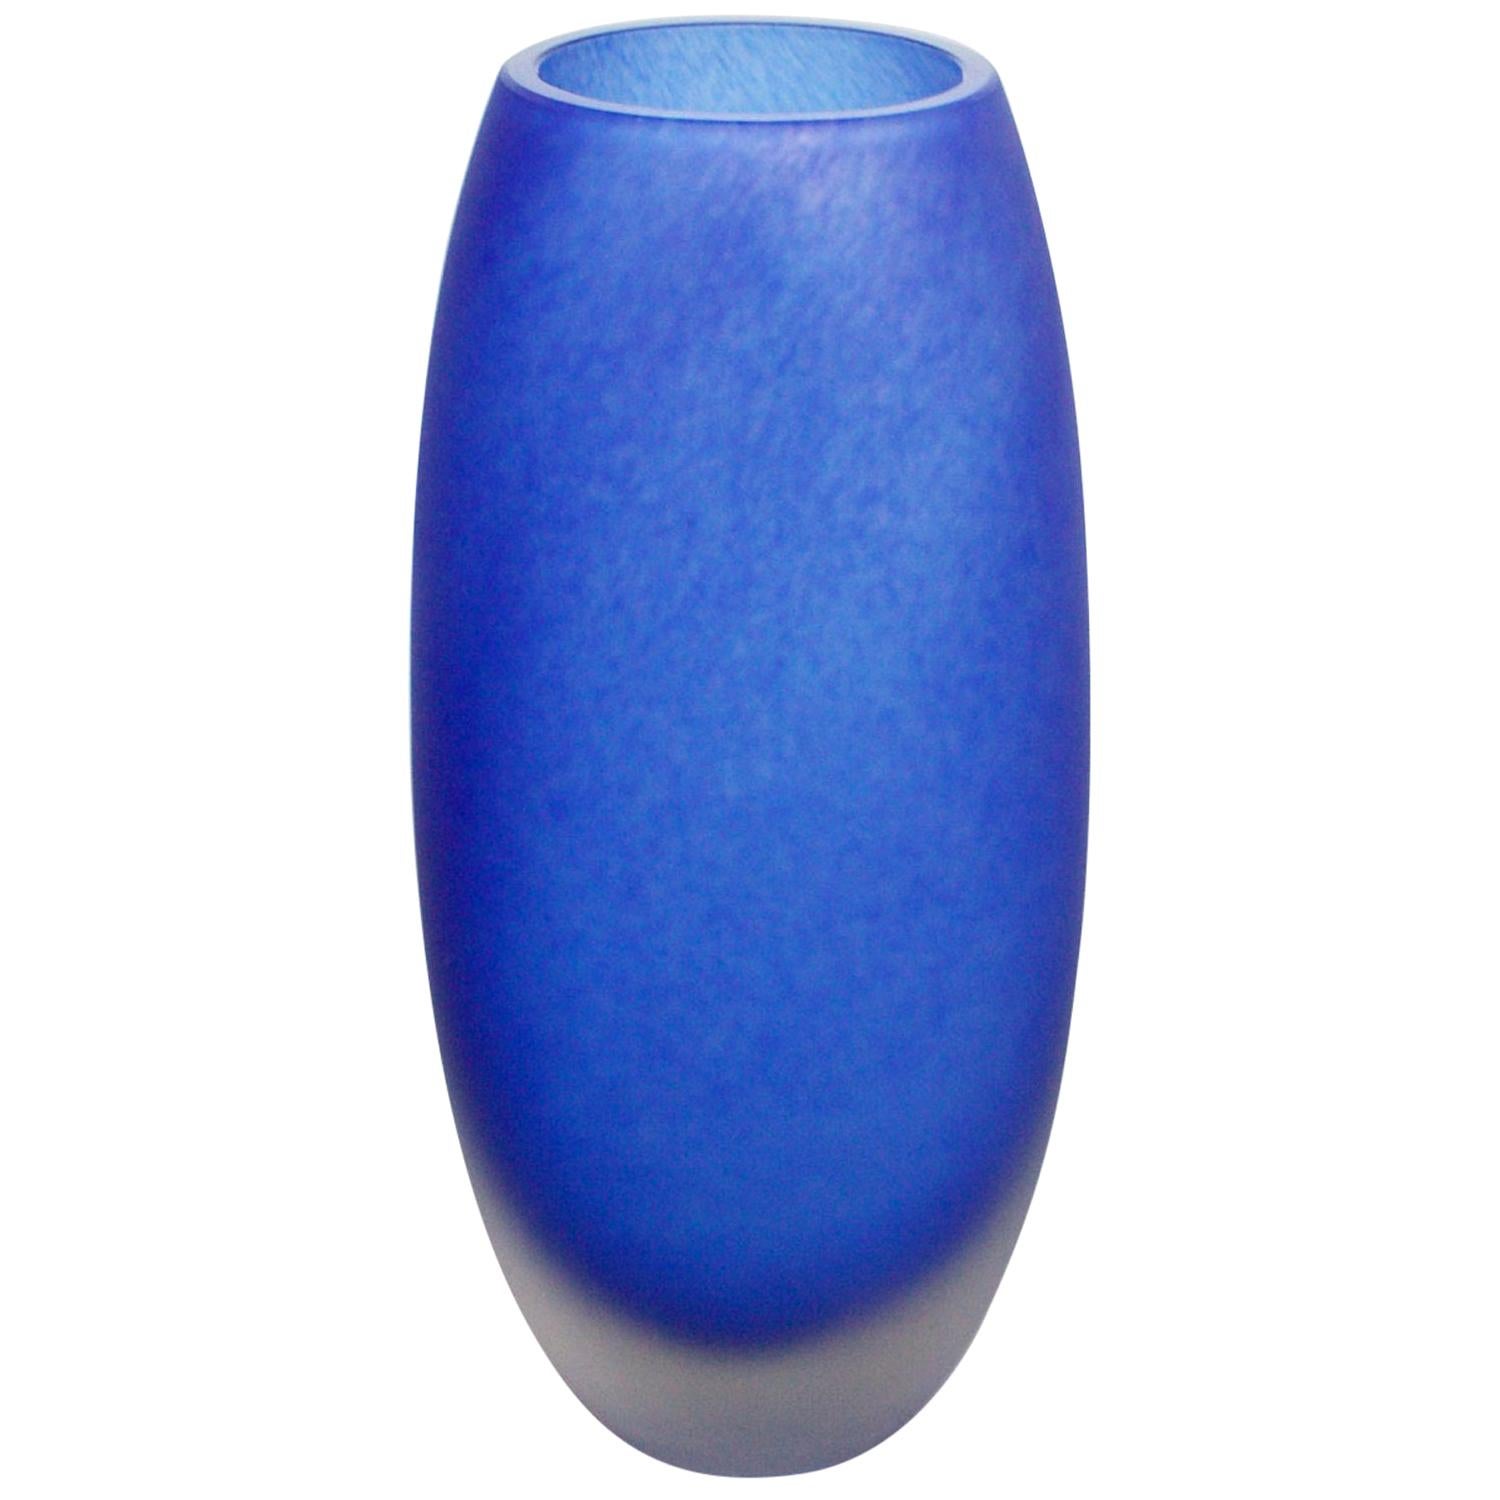 Frosted Blue Murano Glass Vase by Ercole Barovier for Barovier & Toso circa 1970